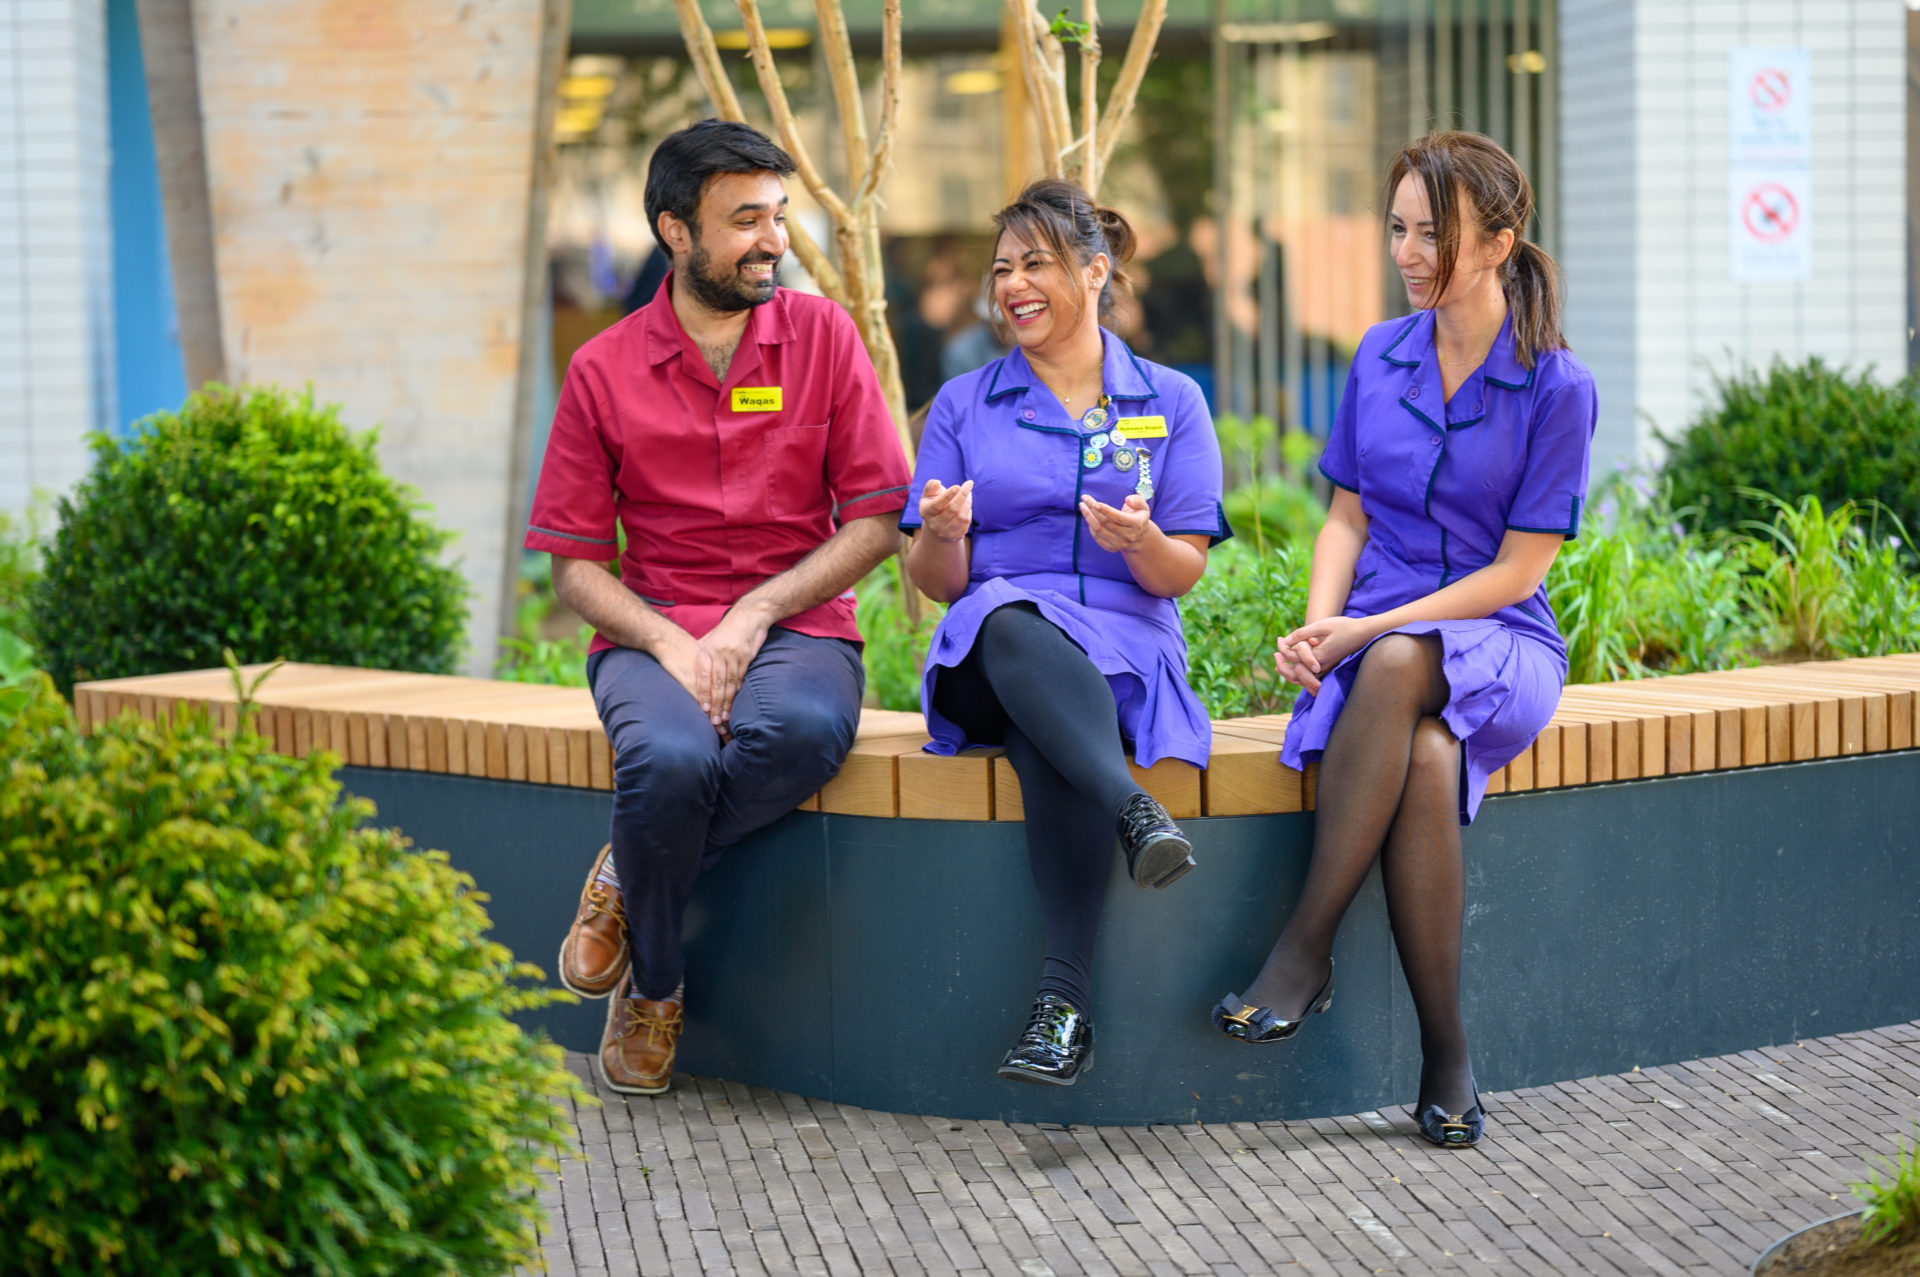 Three nurses at the opening of the Florence Nightingale garden at St Thomas' Hospital. This garden was rebuilt from its display at the Chelsea Flower show with support from Guy's & St Thomas' Charity.